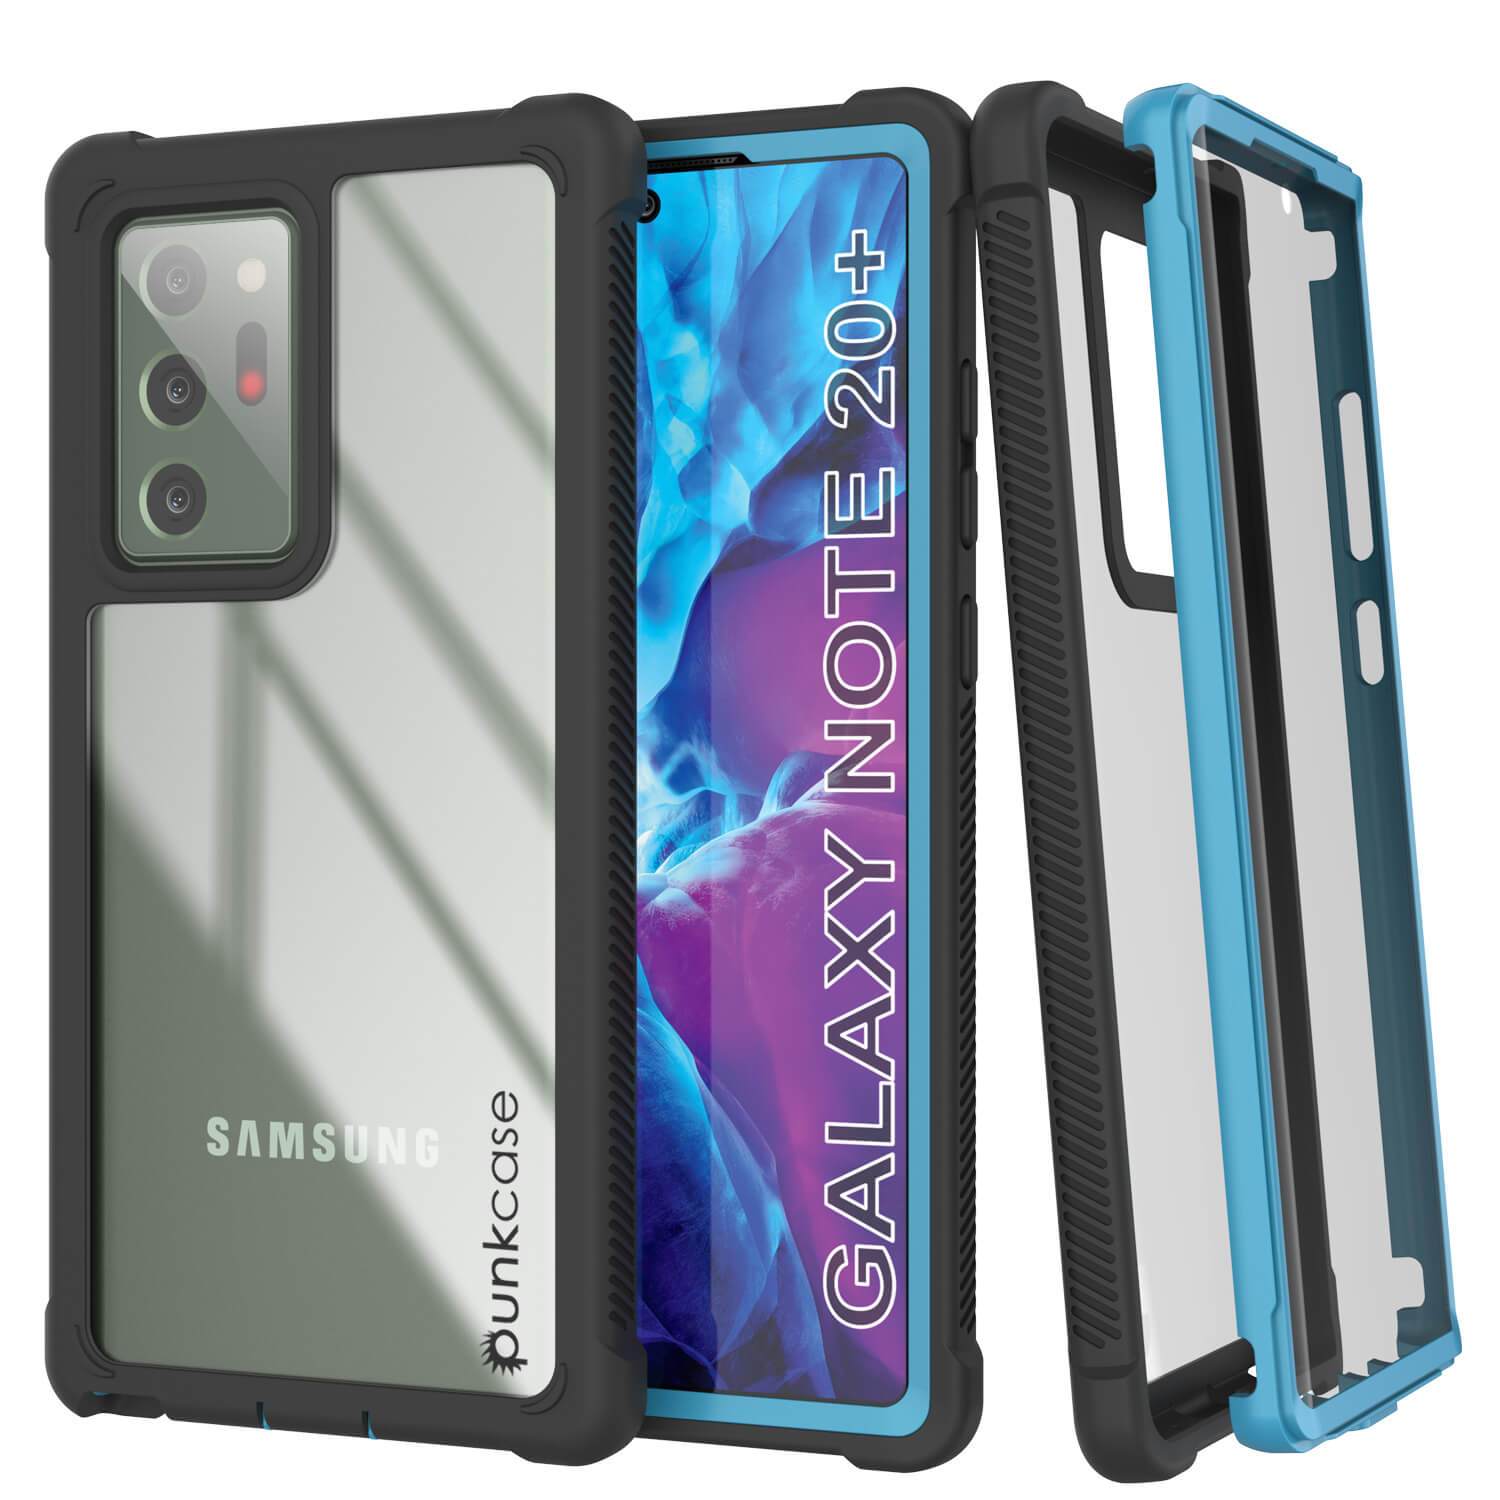 Punkcase Galaxy Note 20 Ultra Case, [Spartan Series] Light Blue Rugged Heavy Duty Cover W/Built in Screen Protector